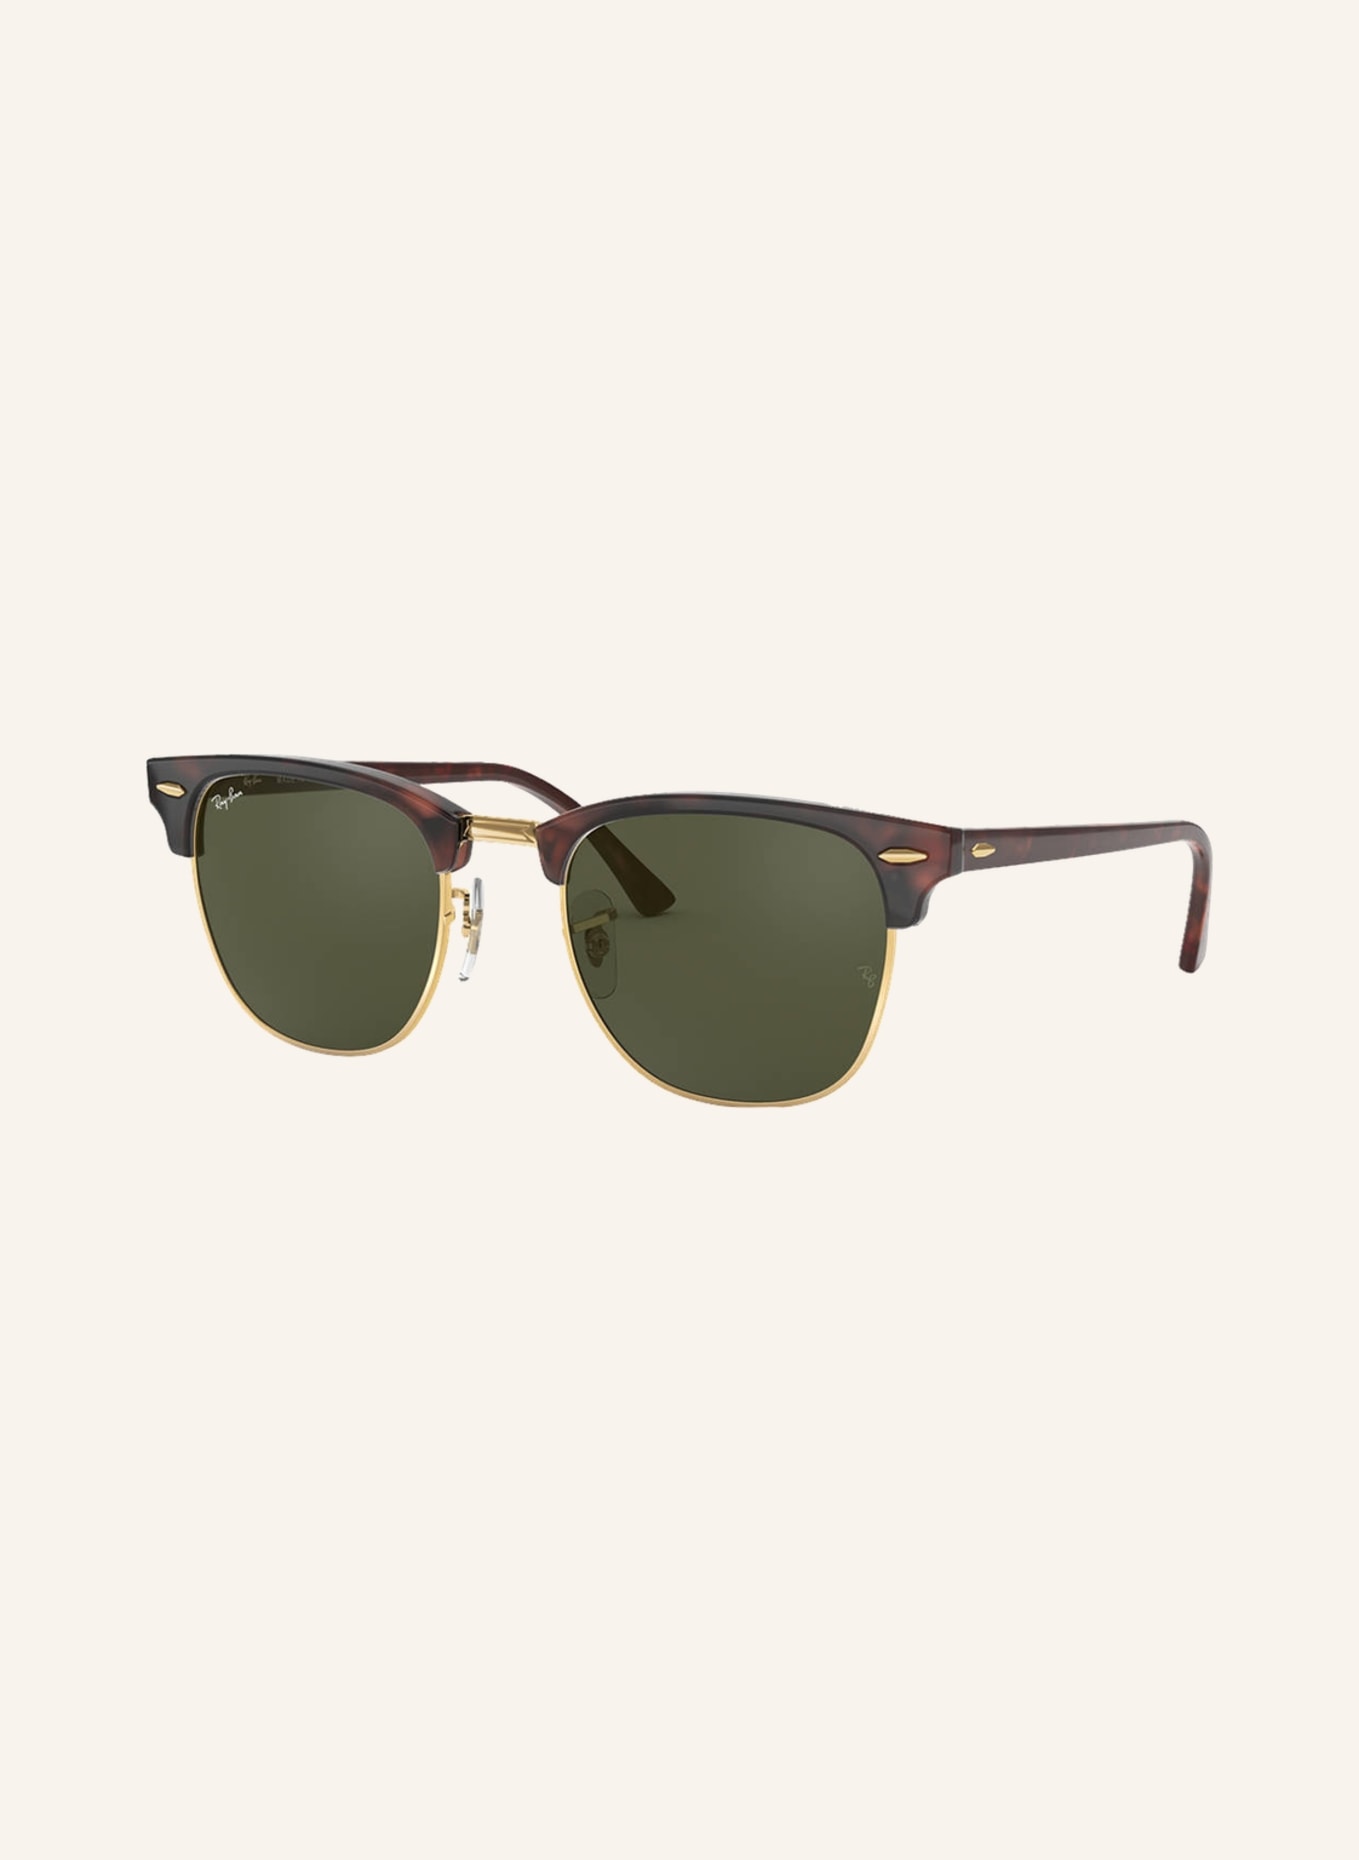 Ray-Ban Sunglasses RB3016 CLUBMASTER, Color: W0366 - HAVANA/GOLD/DARK GREEN (Image 1)